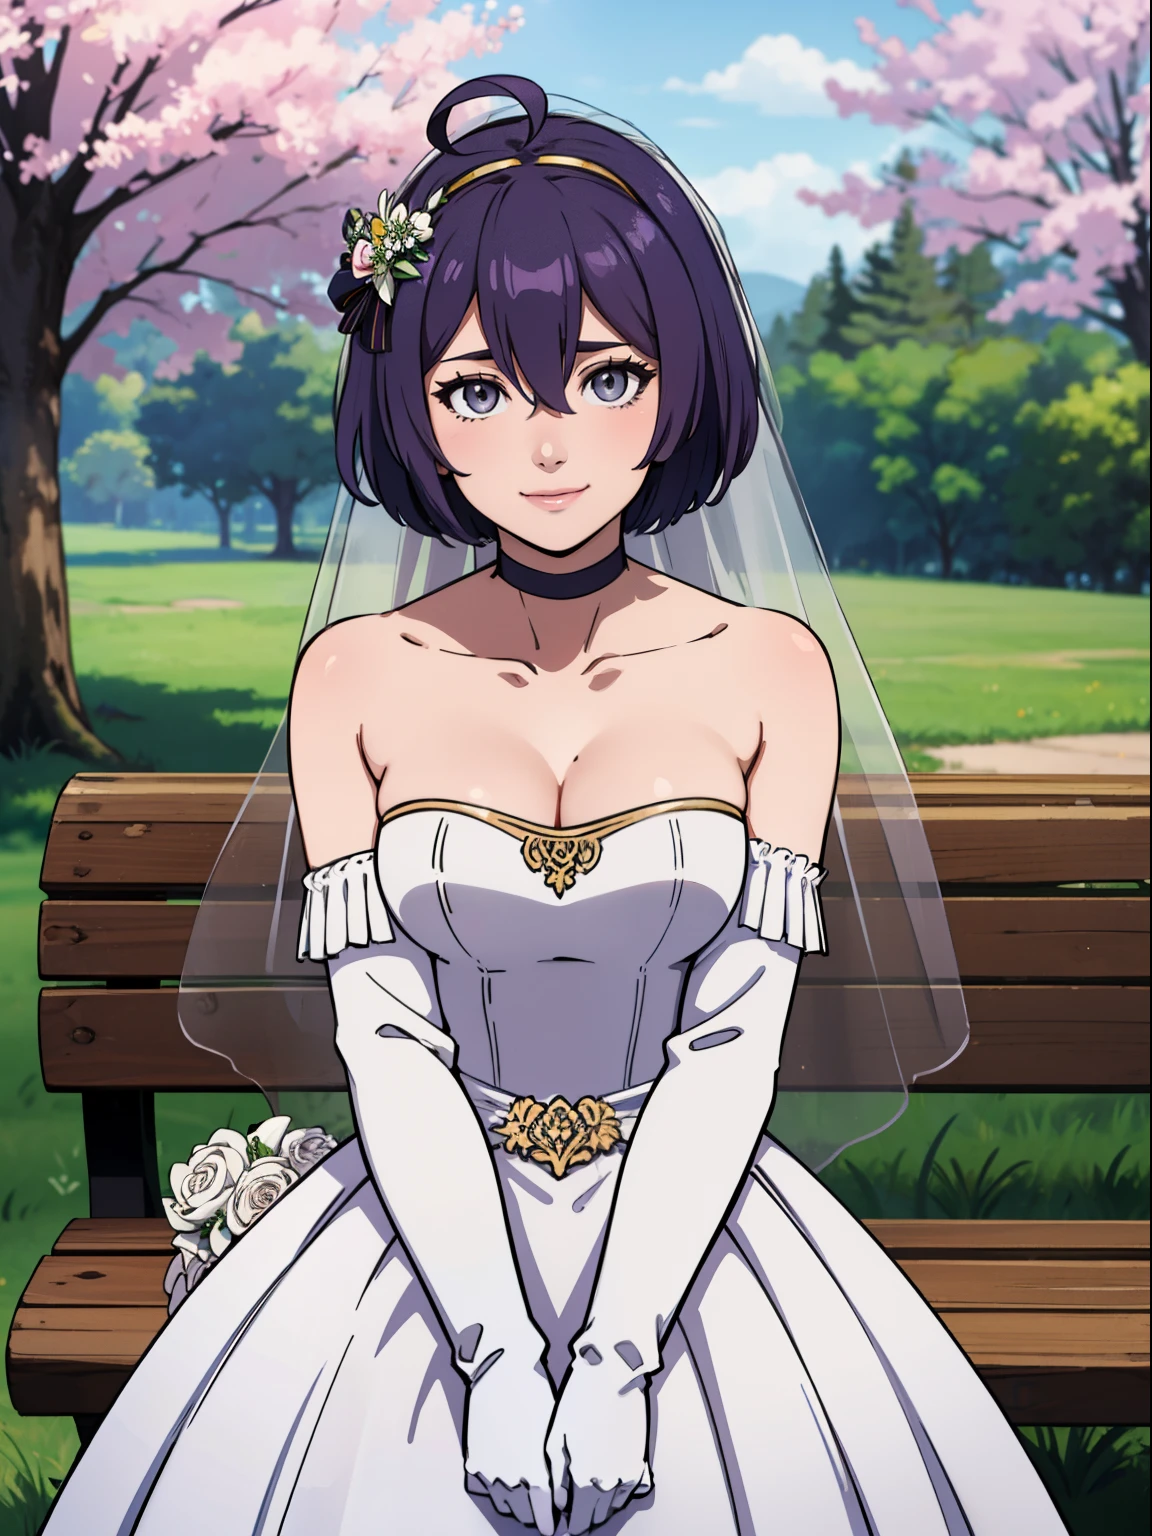 warBernie, hair bow, purple hair, grey eyes, hair between eyes, ahoge, hair ornament, gloves, dress, cleavage, bare shoulders, collarbone, white oprea gloves, white gloves, white dress, strapless, white choker, tiara, veil, strapless dress, wedding dress, bridal veil, beautiful woman, perfect body, perfect breasts, wearing a wedding dress, ball gown, in the park trees, wedding decorations, looking at the viewer, warm smile, realism, masterpiece, textured skin, super detail, high detail, high quality, best quality, 1080p,